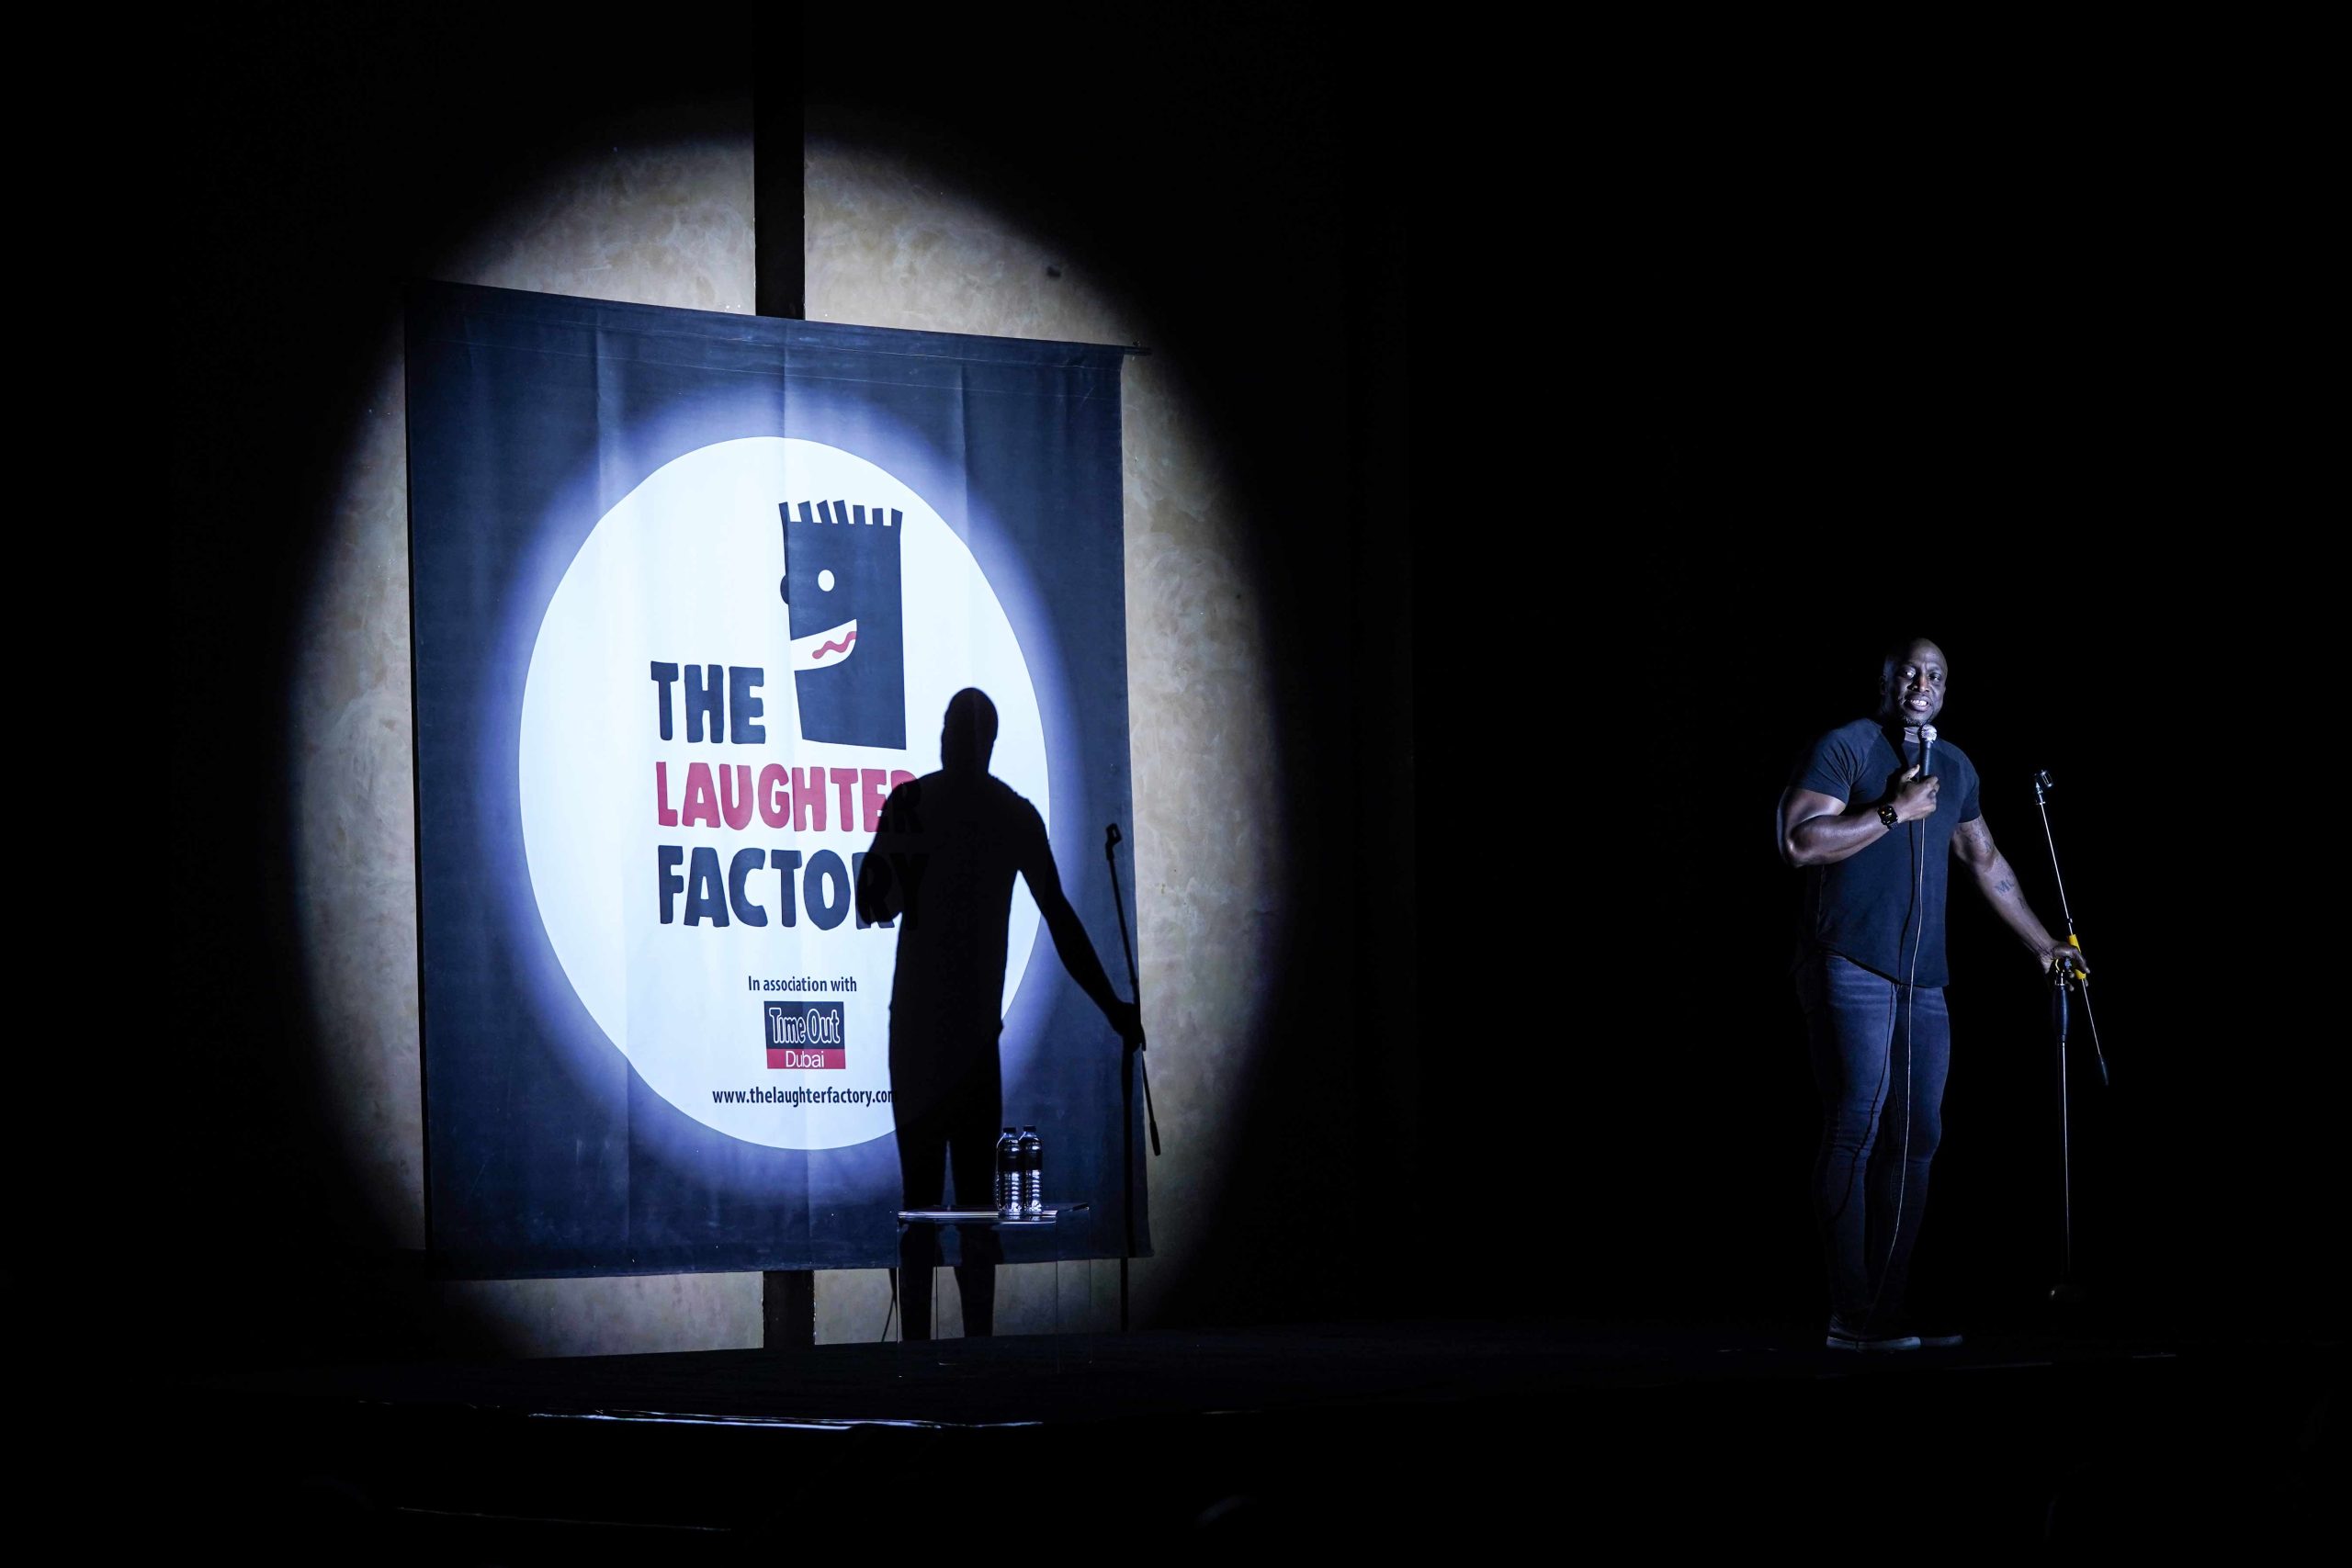 The Laughter Factory’s show was held for the first time in Iraq and Kurdistan